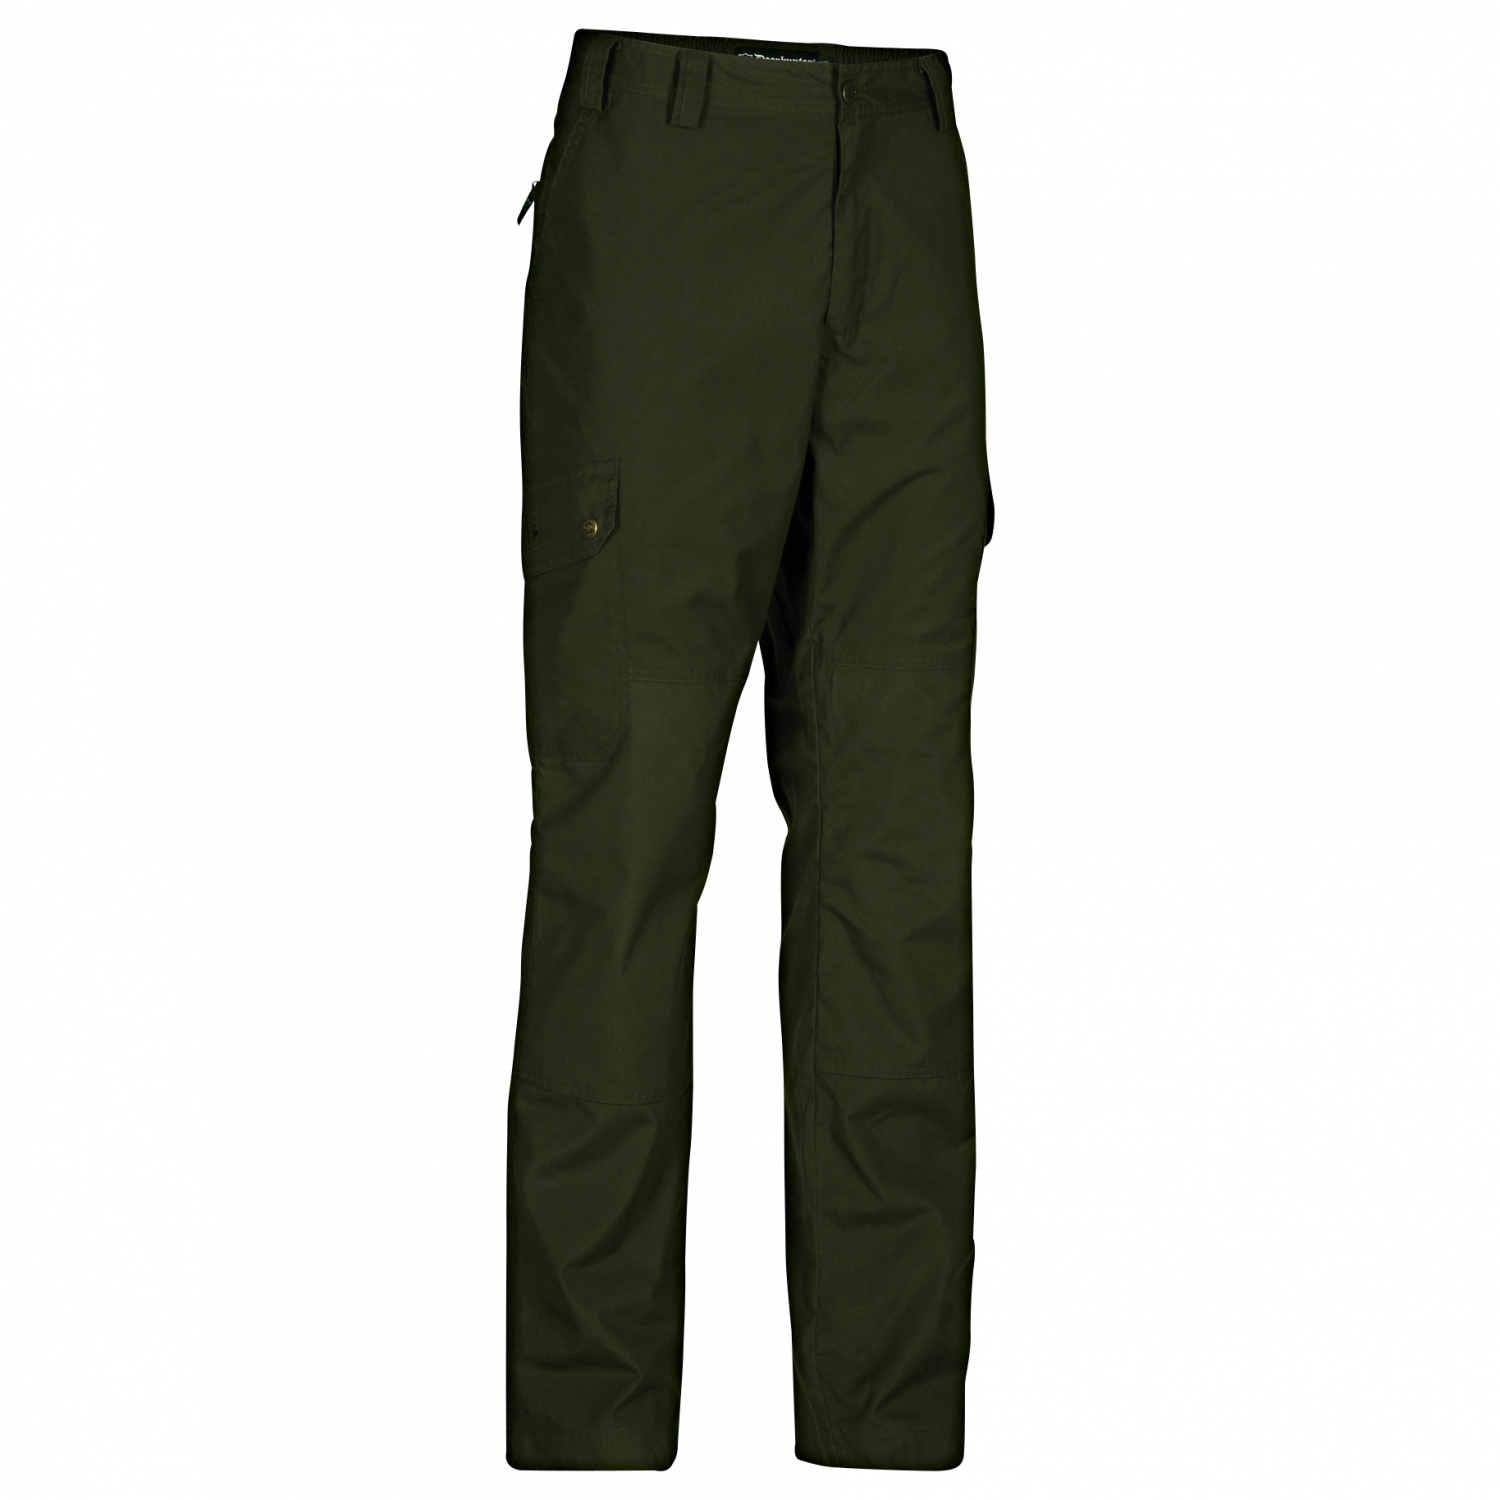 Alilyol Fall Winter Casual Baggy Corduroy Pants for Men Hip Hop Wide Leg  Loose Elastic Waist Baggy Solid Trousers Army Green at Amazon Men's  Clothing store